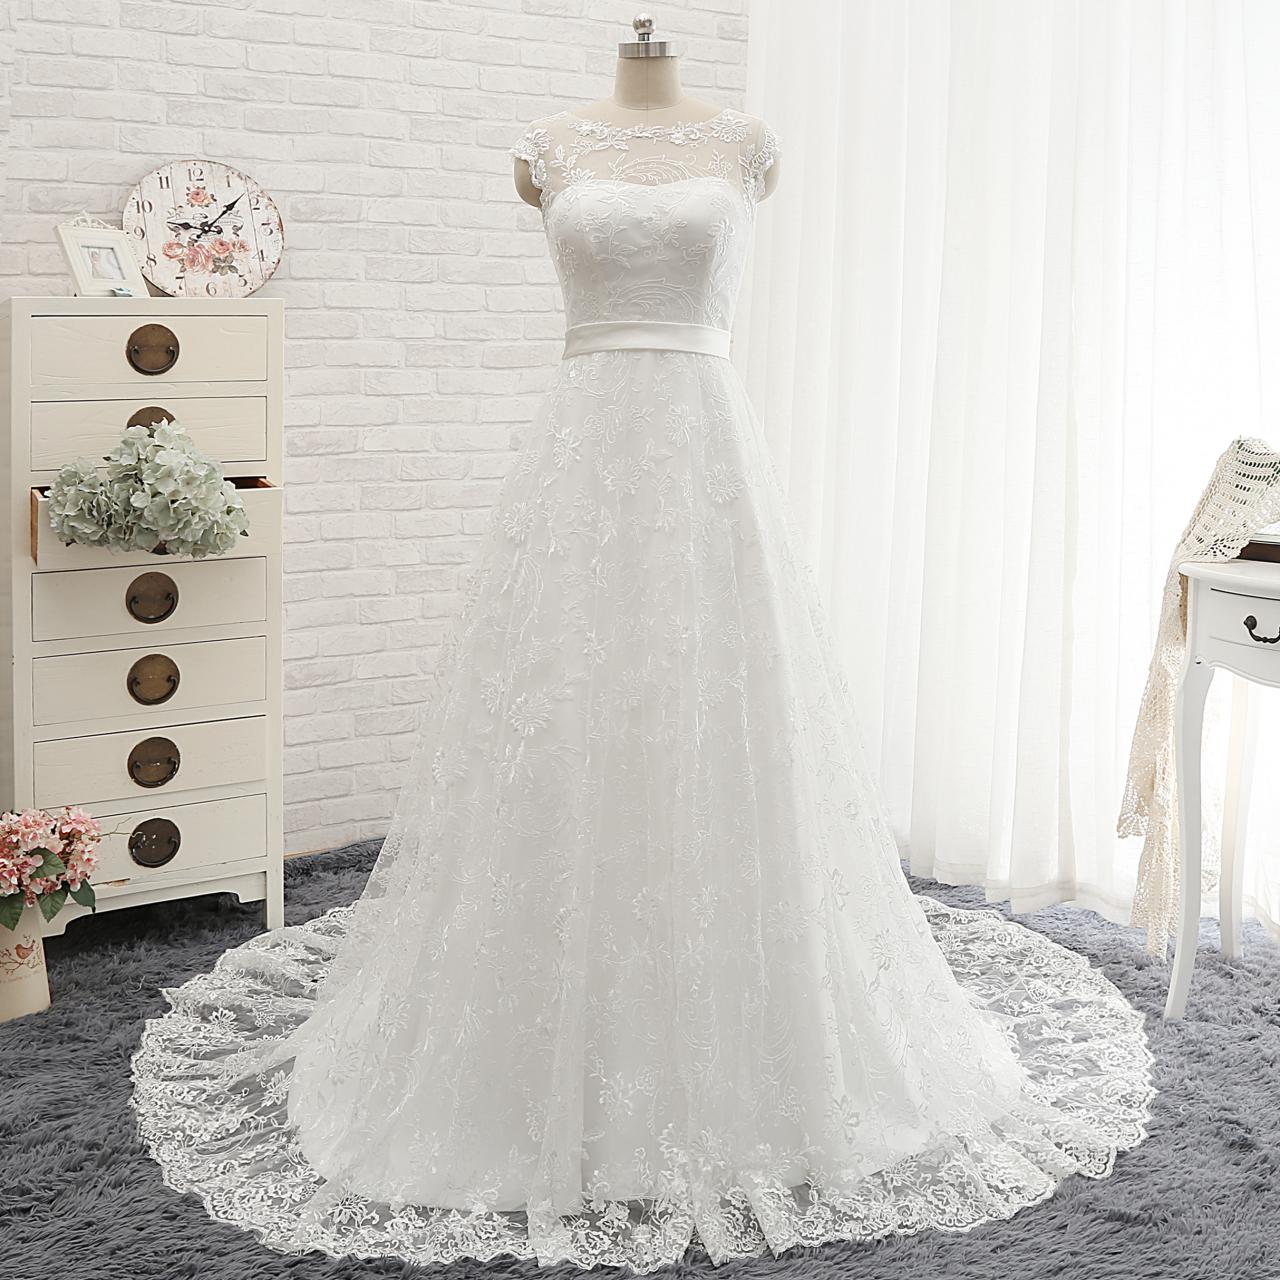 Cap Sleeves Full Lace Wedding Dress,a Line Long Lace Formal Elegant Wedding Dress,long Wedding Dress With Long Train